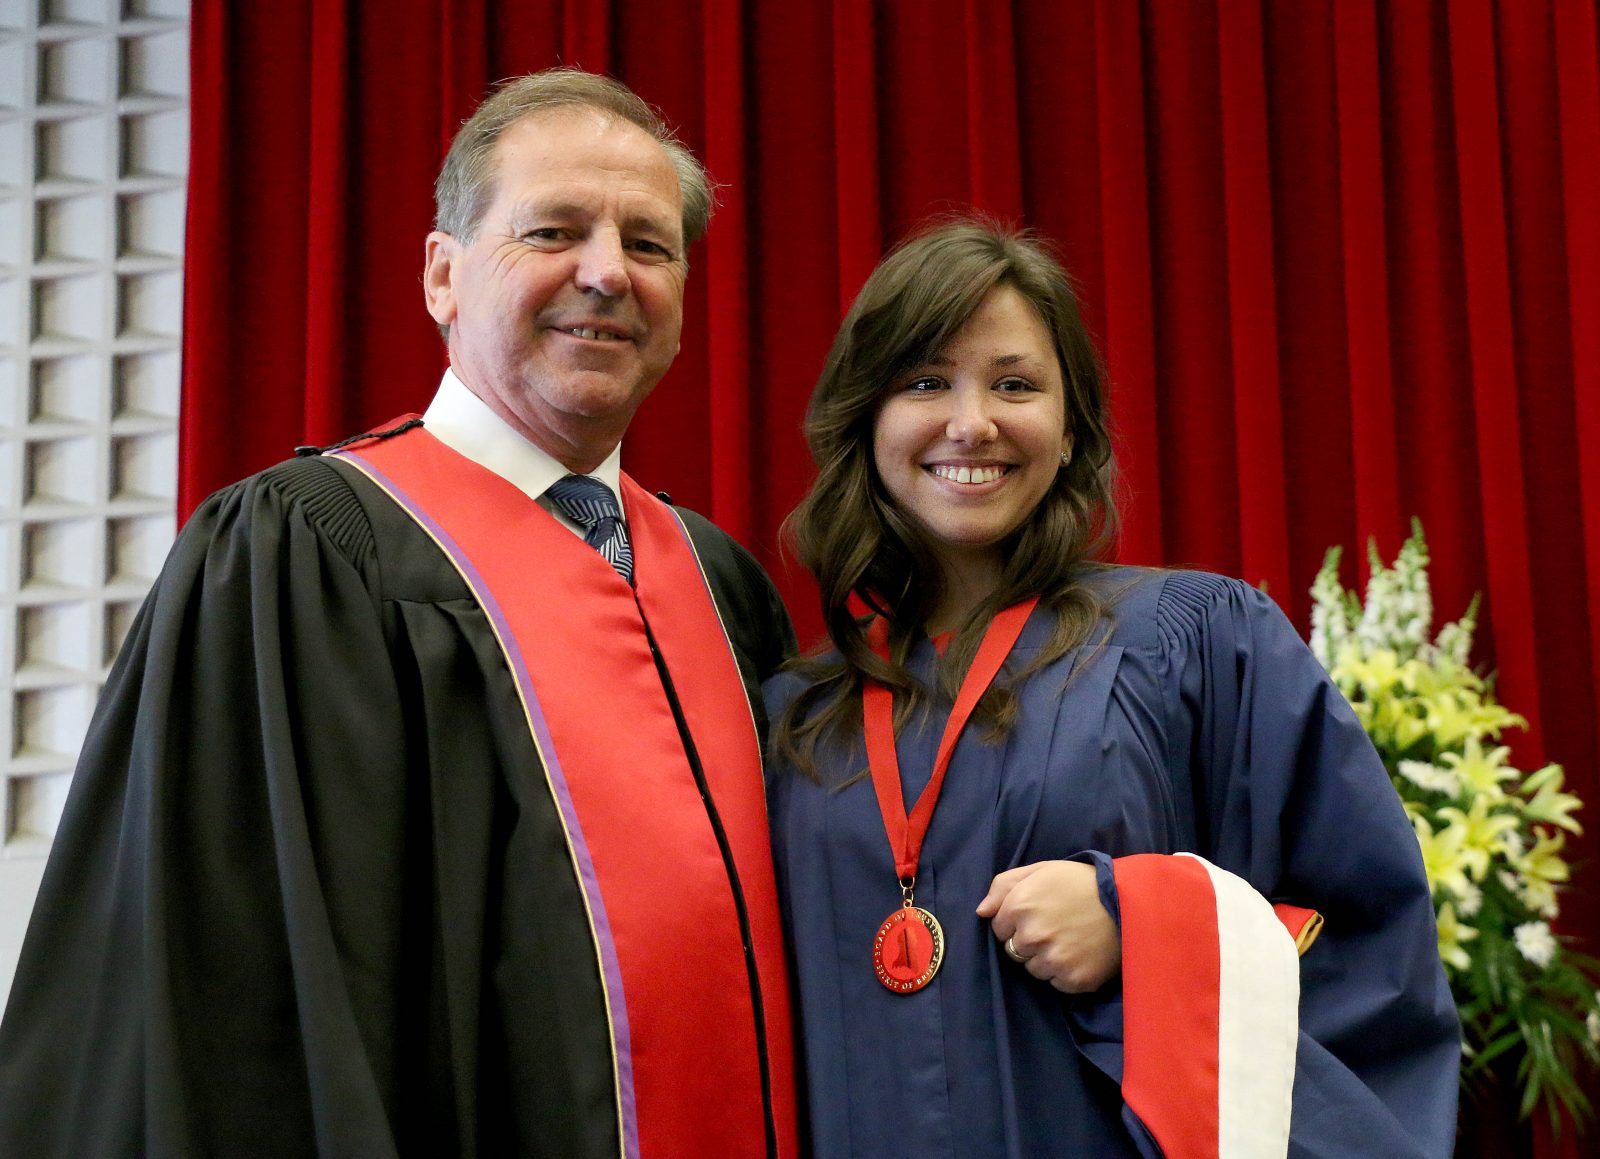 Board of Trustee chair John Suk presented undergraduate Kaitlyn Daw, from the Faculty of Humanities, with the Spirit of Brock award Wednesday morning.